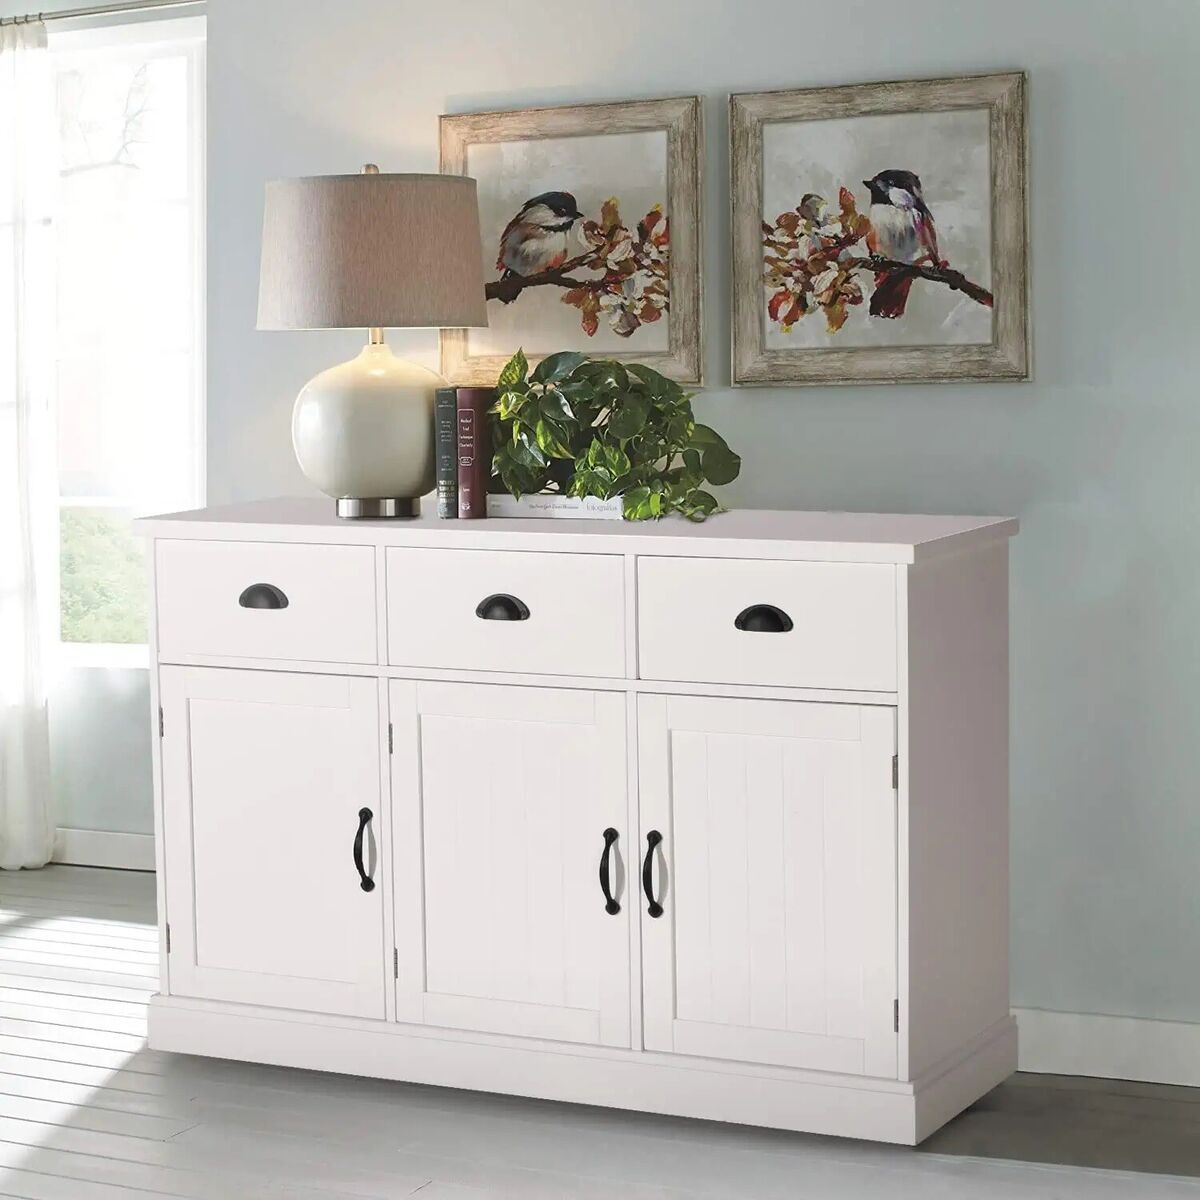 Sideboard Buffet Storage Cabinet W/3 Door 3 Drawers Farmhouse Coffee Bar  Cabinet | Ebay Intended For Most Popular 3 Drawers Sideboards Storage Cabinet (View 8 of 15)